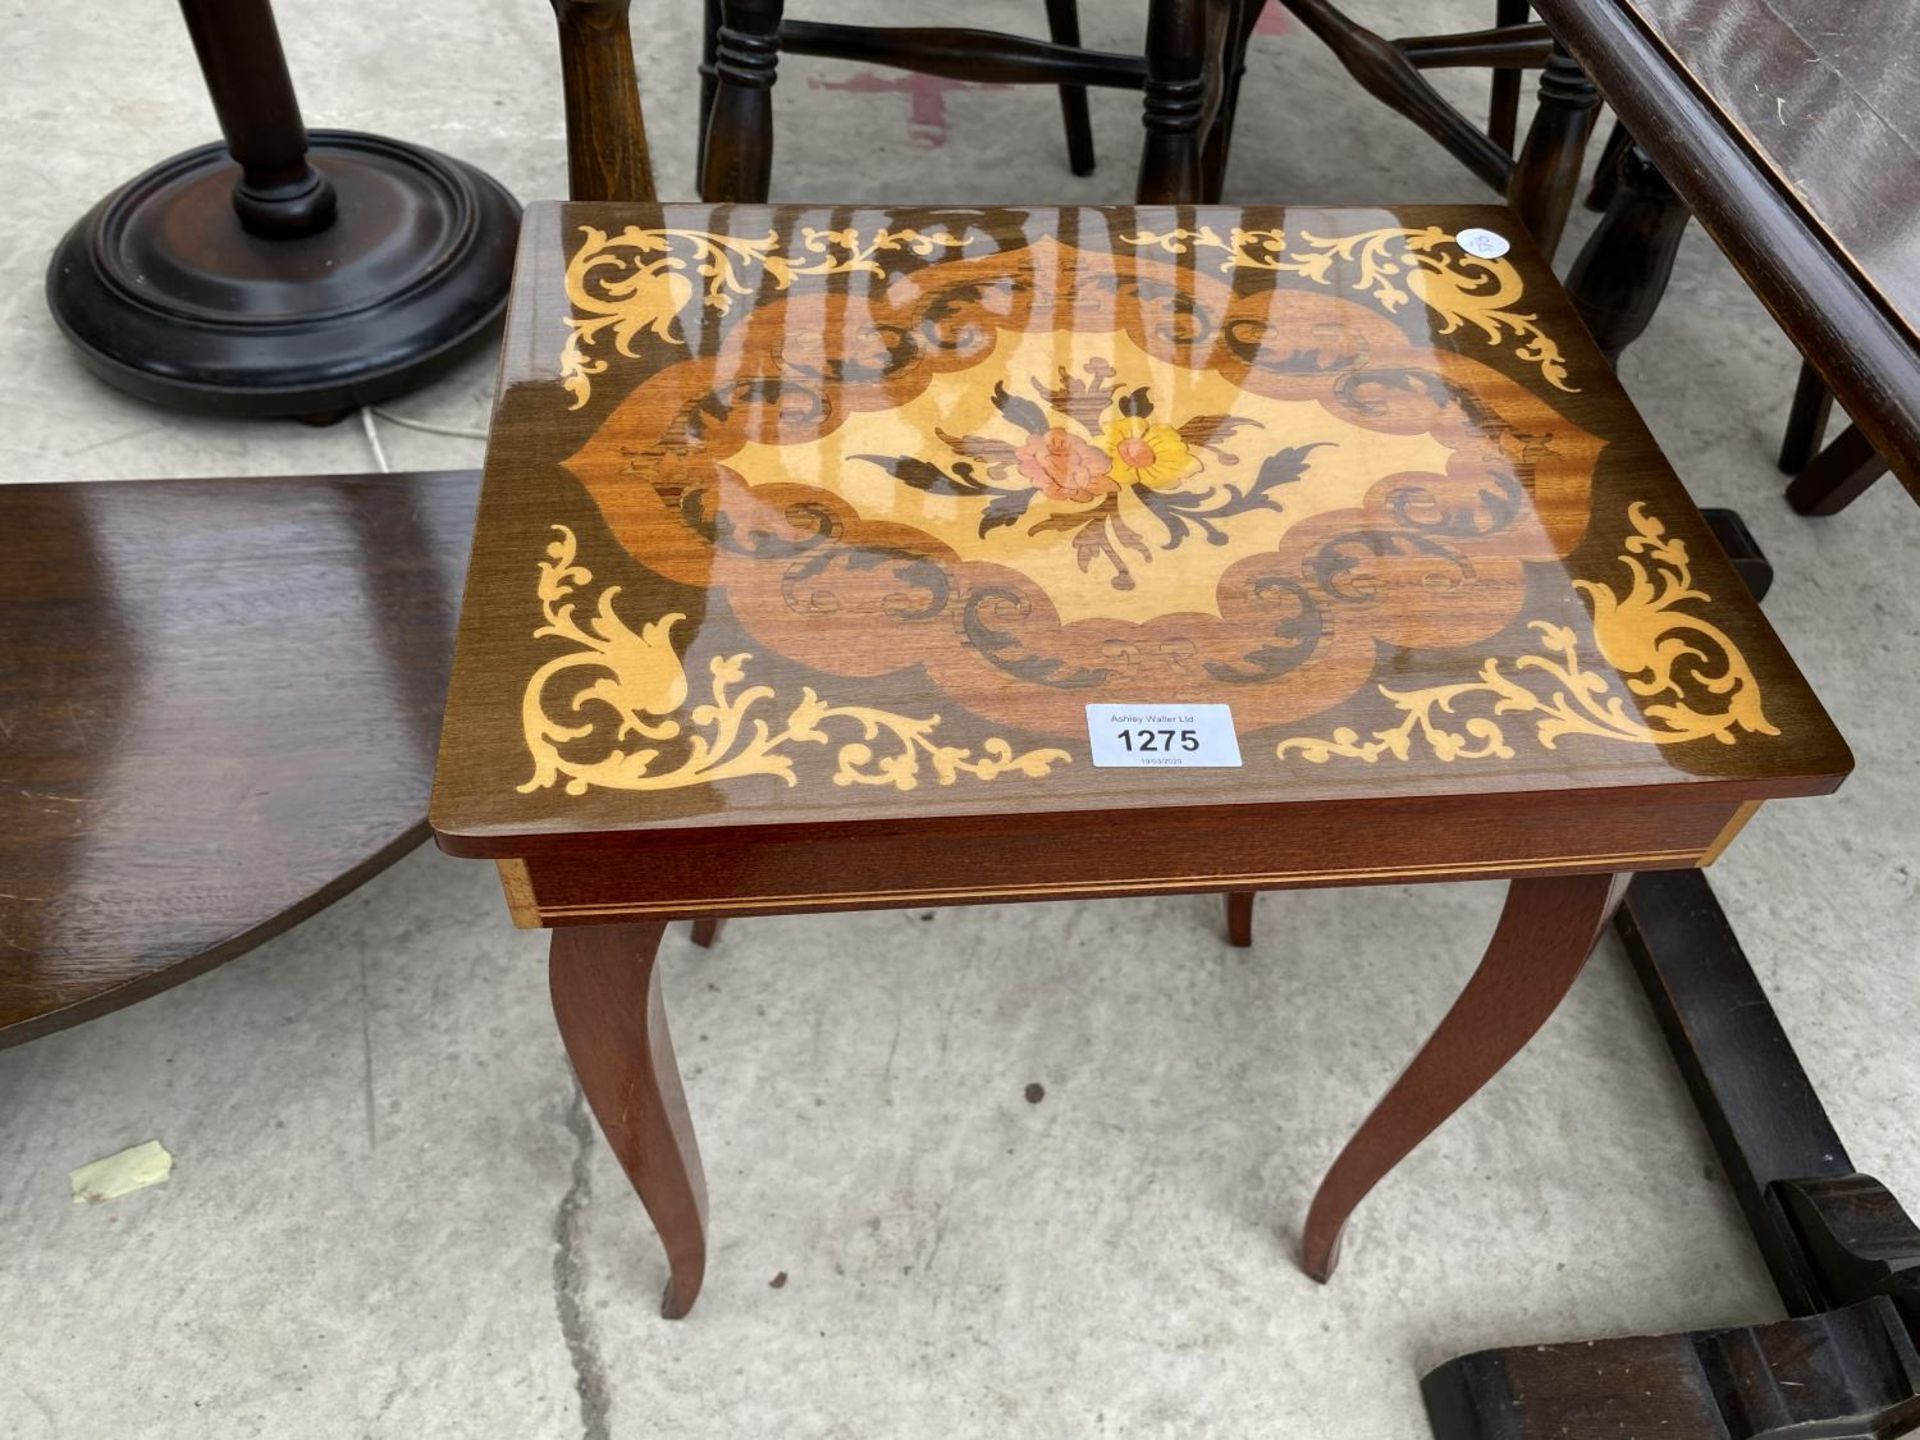 AN ITALIAN INLAID MAHOGANY SEWING TABLE WITH HINGED TOP AND A MAHOGANY COFFEE TABLE - Image 2 of 5